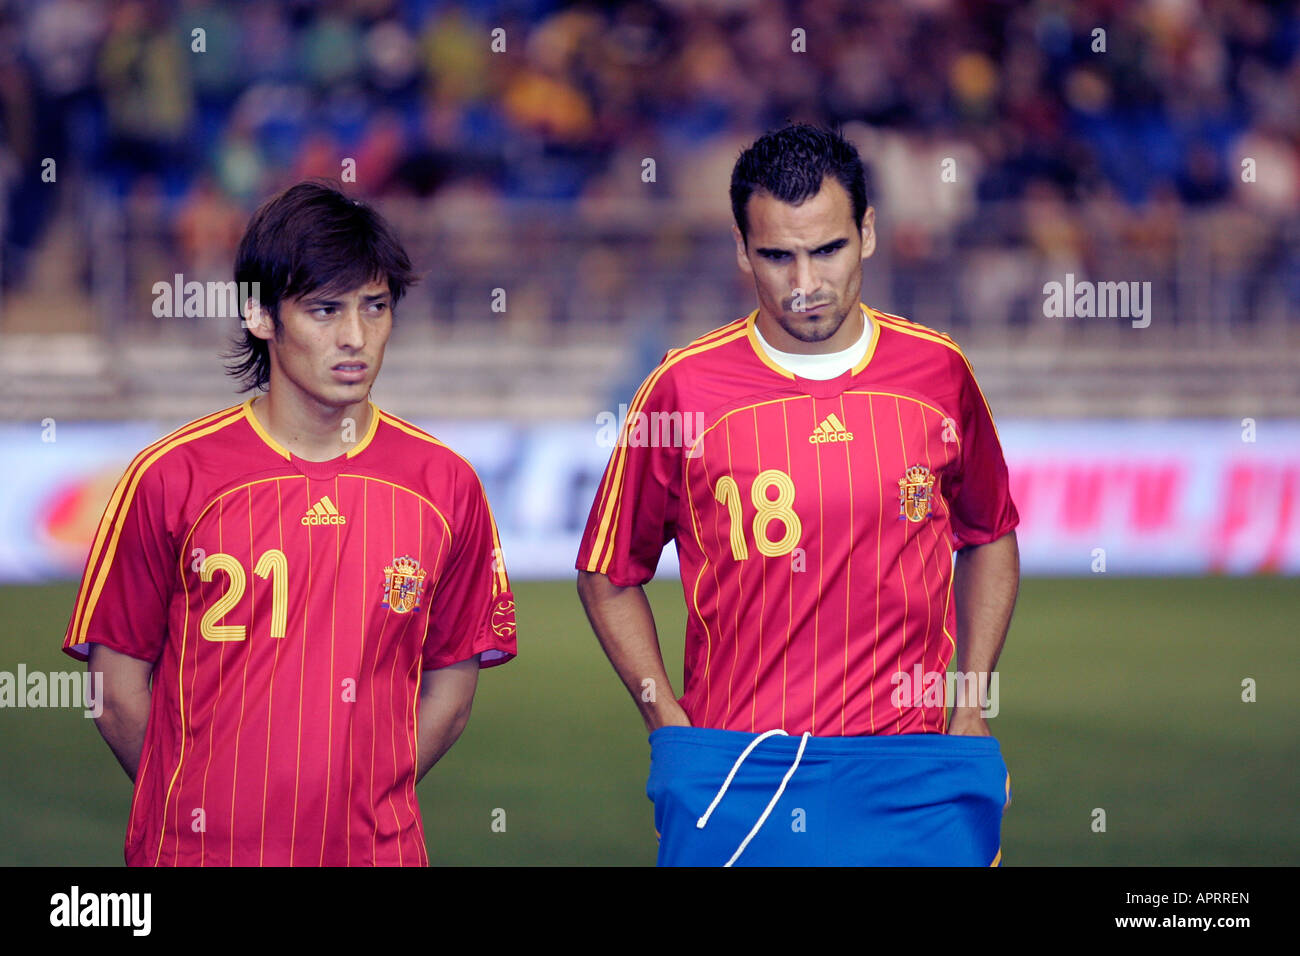 David Silva and Angel forming before the match. Stock Photo